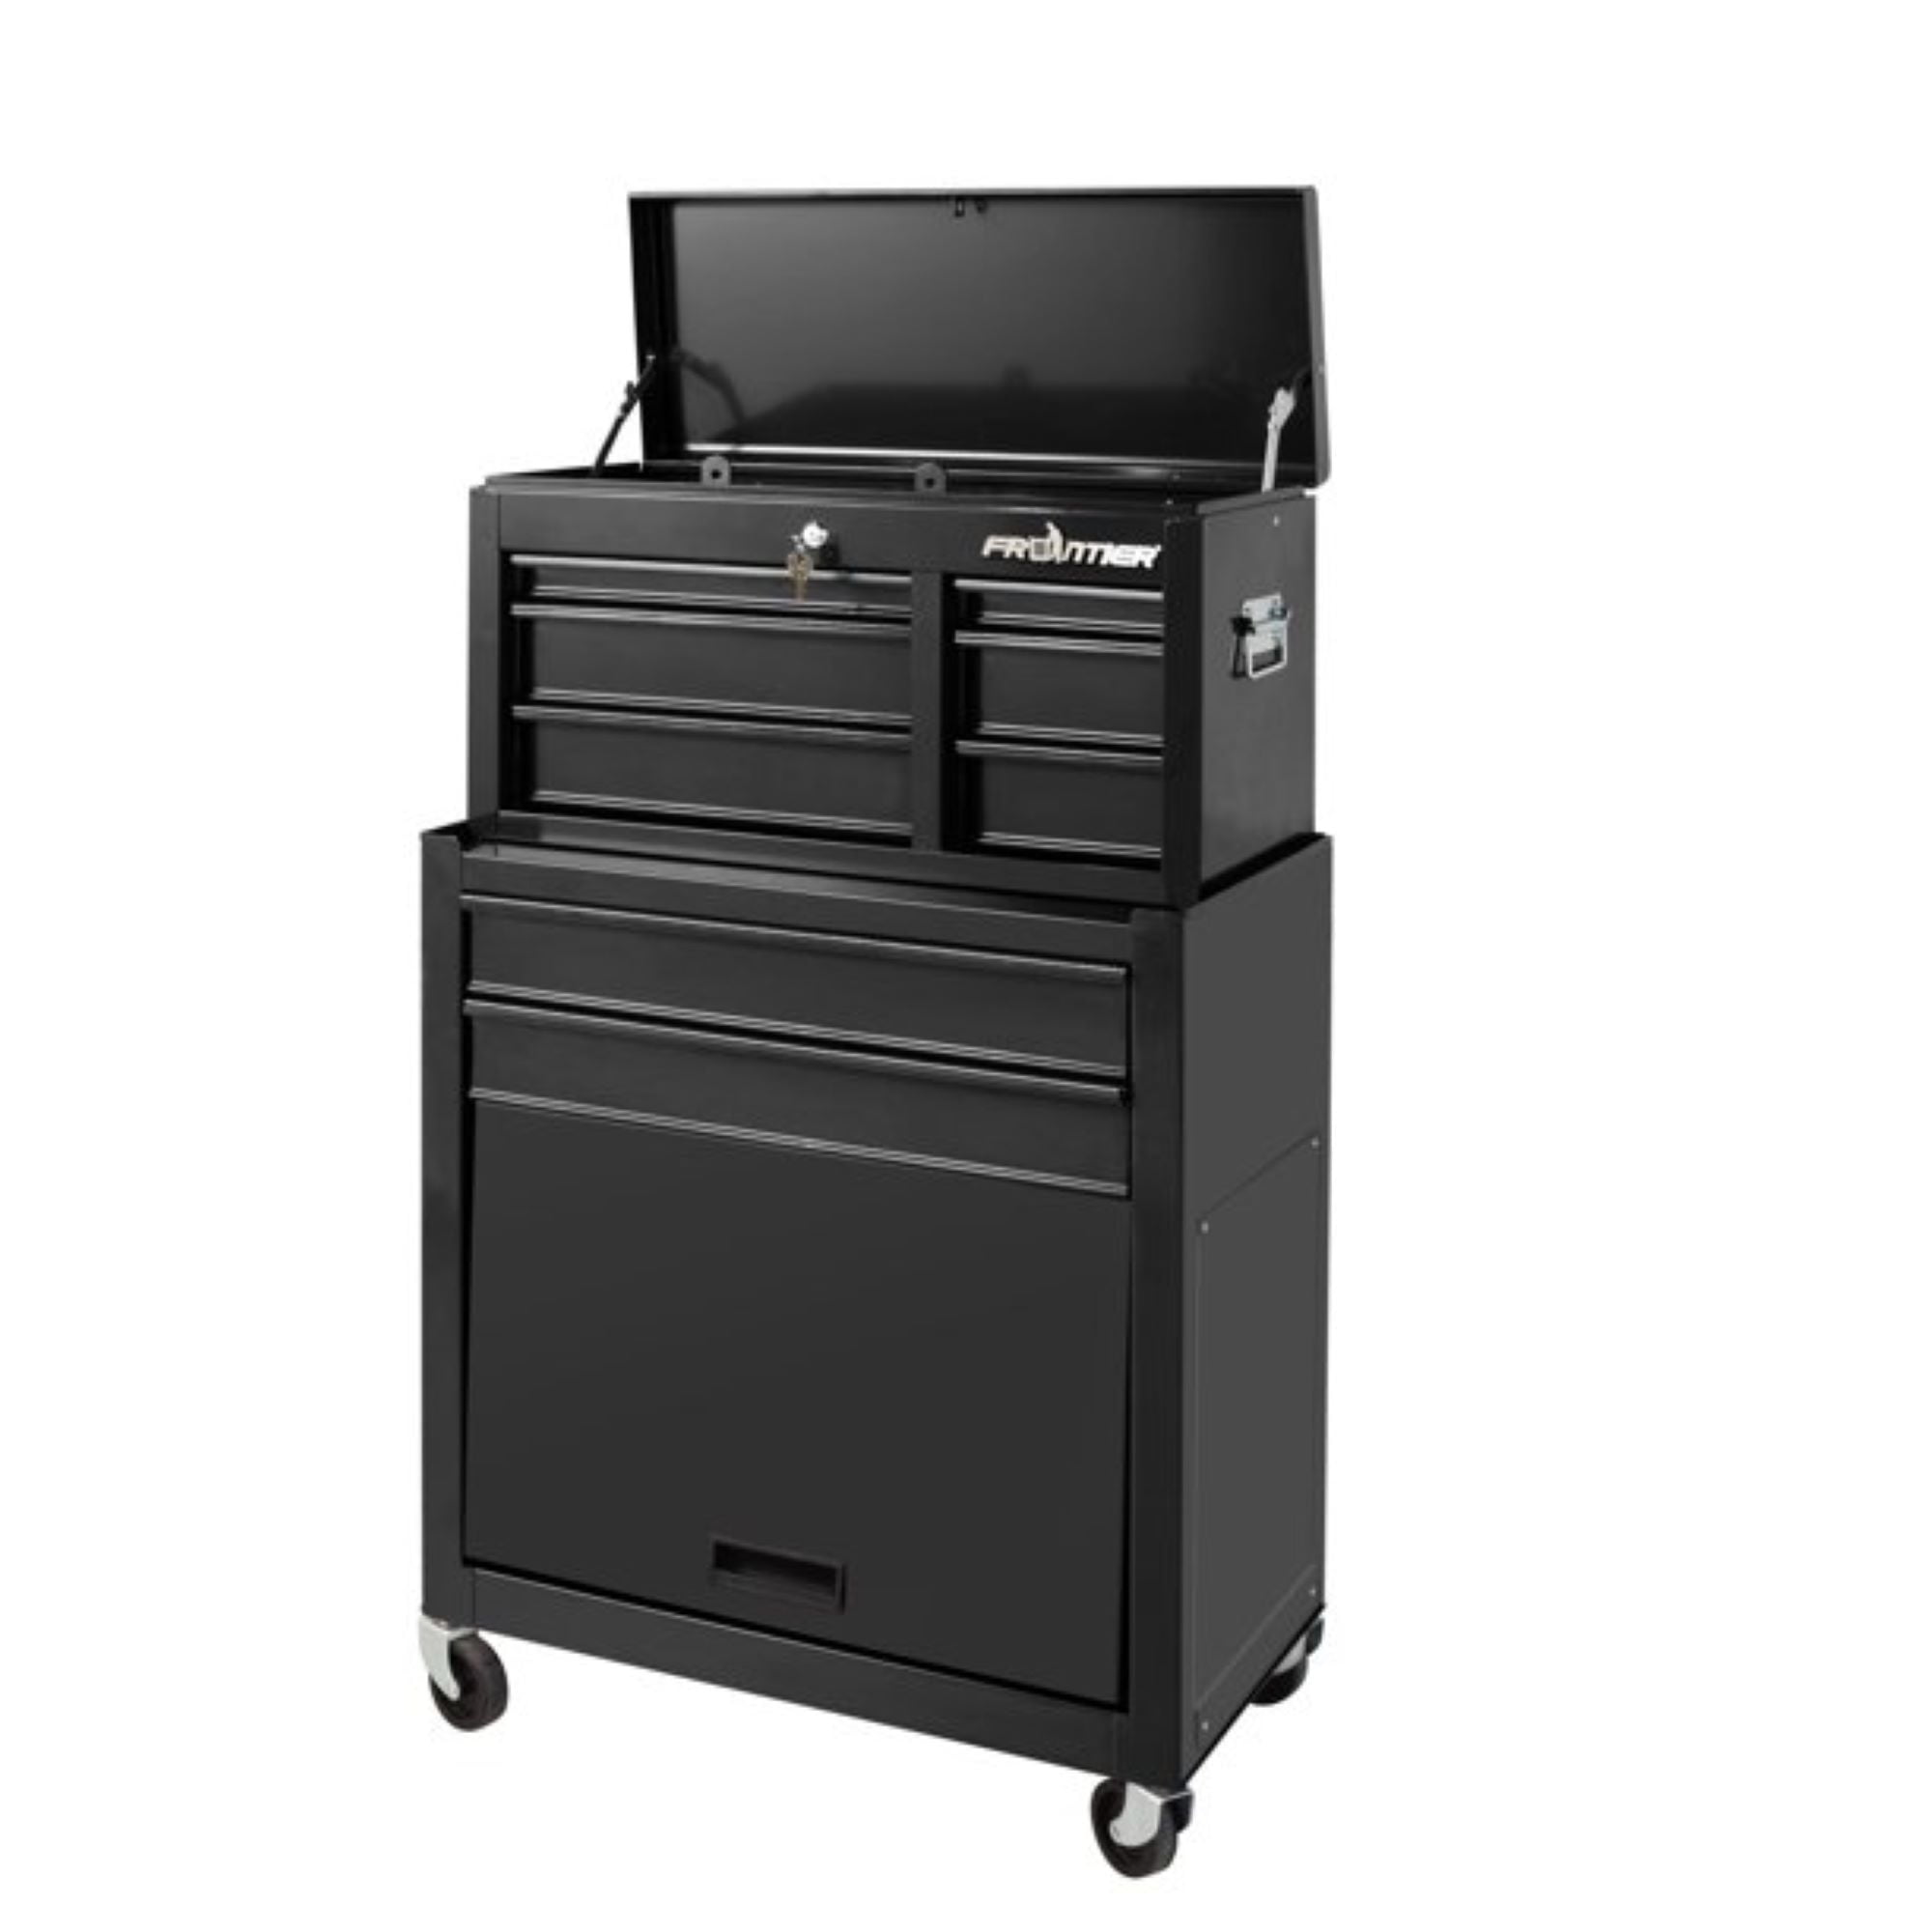 24" Frontier 5-Drawer Rolling Tool Chest and Cabinet Combo (Steel, Black) $149 + Free Shipping